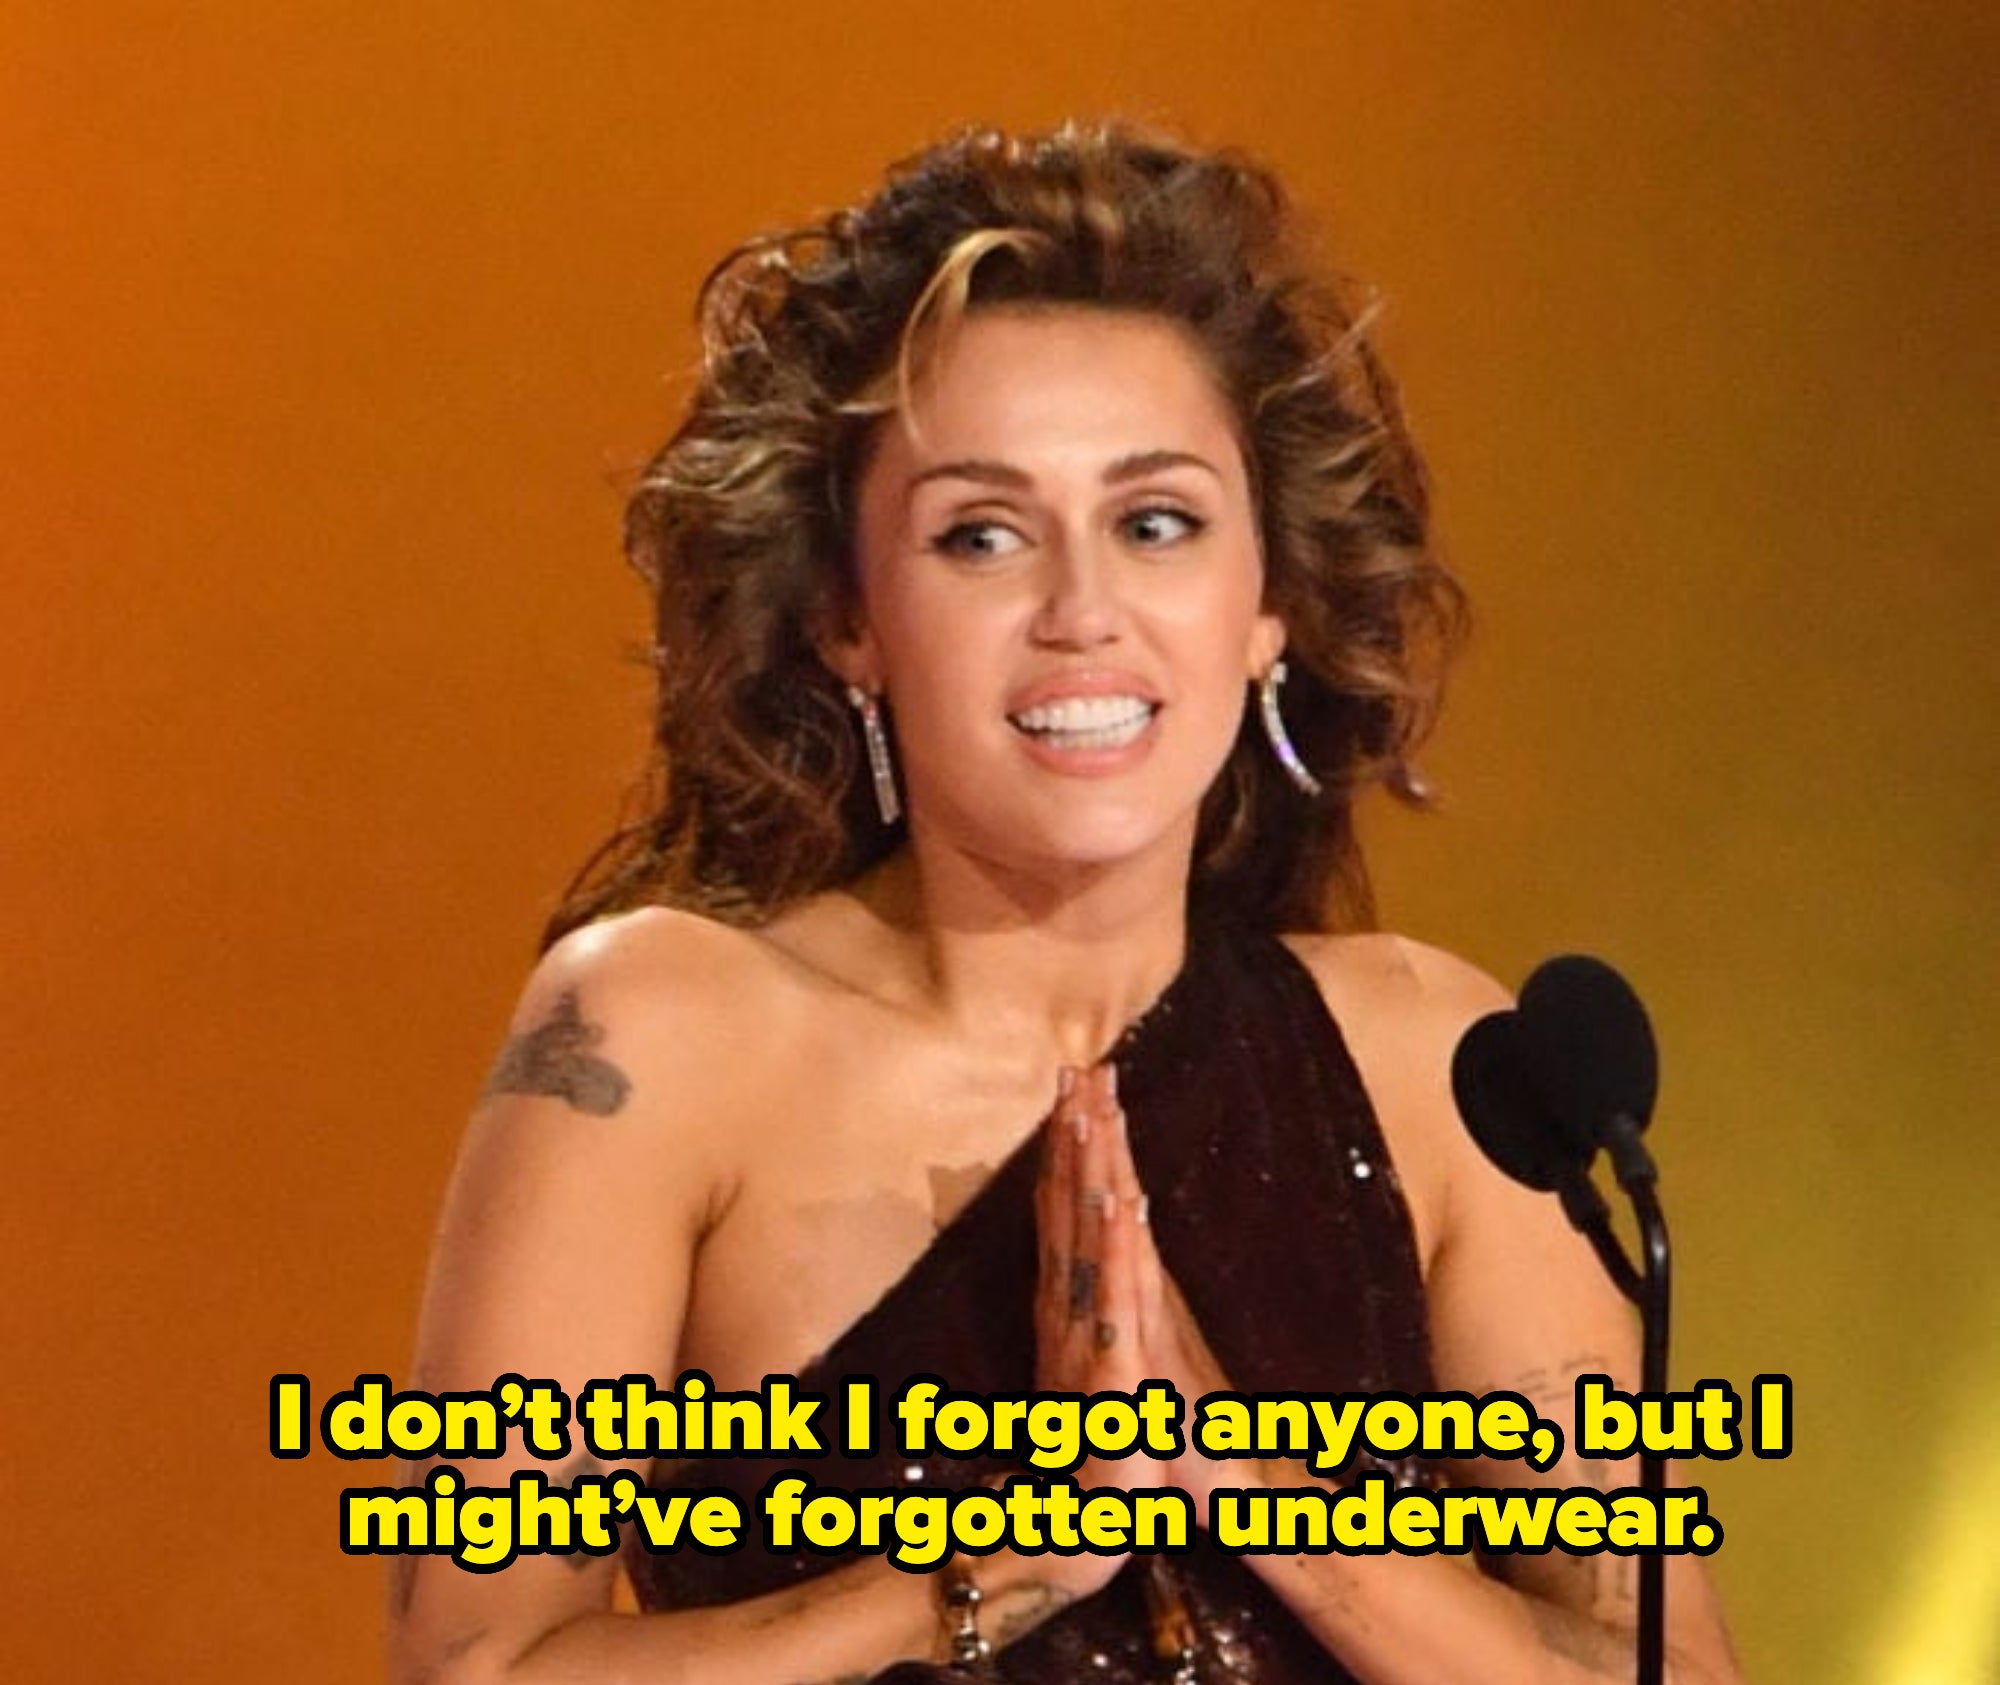 Miley onstage saying, &quot;I don&#x27;t think I forgot anyone, but I might&#x27;ve forgotten underwear&quot;